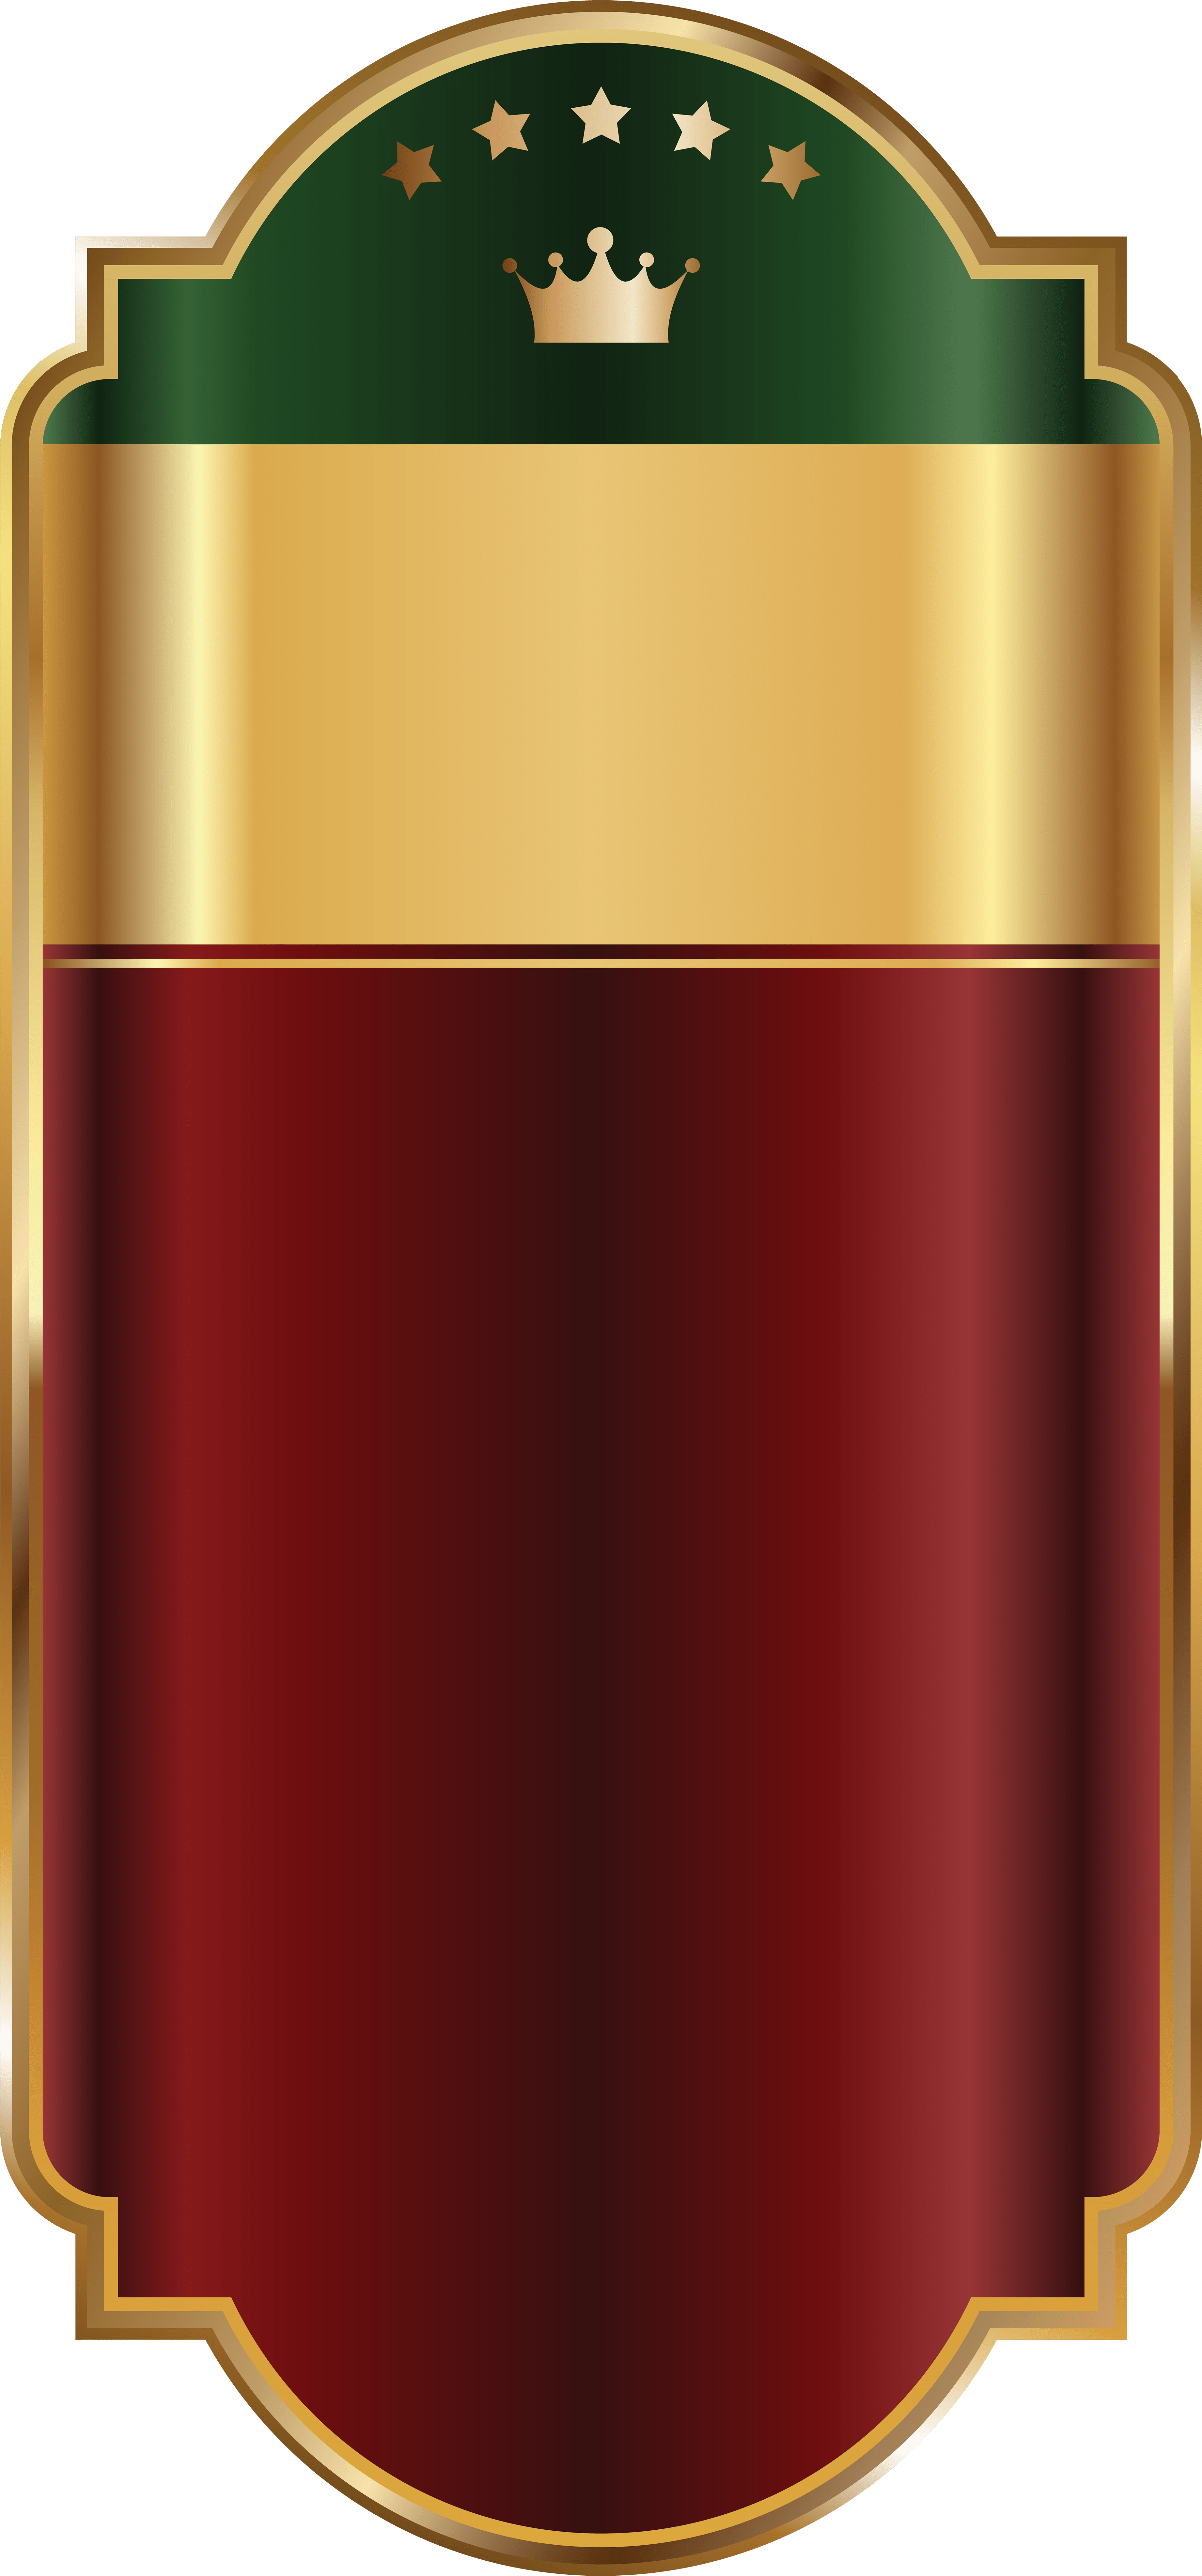 A Gold And Red Rectangular Object